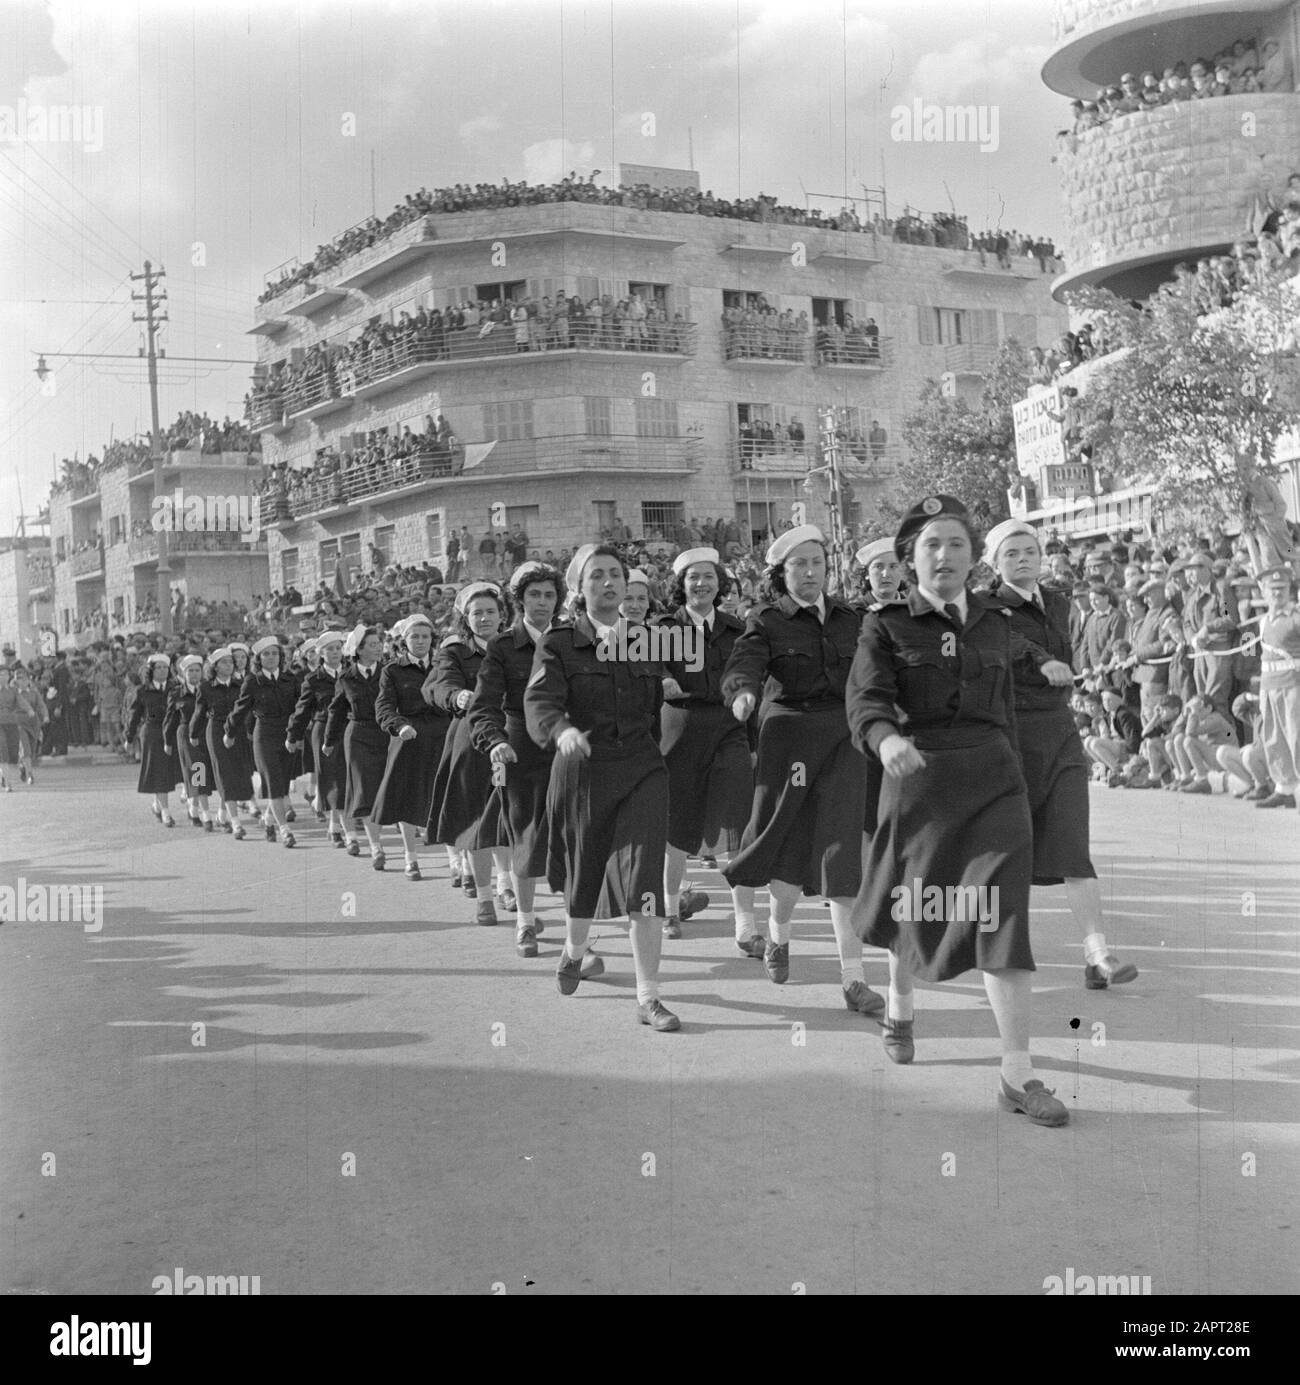 Israel 1948-1949: Haifa  Female naval personnel unit during the military parade in Haifa on the occasion of the first anniversary of Israel's independence on May 15, 1949 Date: May 15, 1949 Location: Haifa, Israel Keywords: architecture, navy, military parades, public, uniforms, women Stock Photo